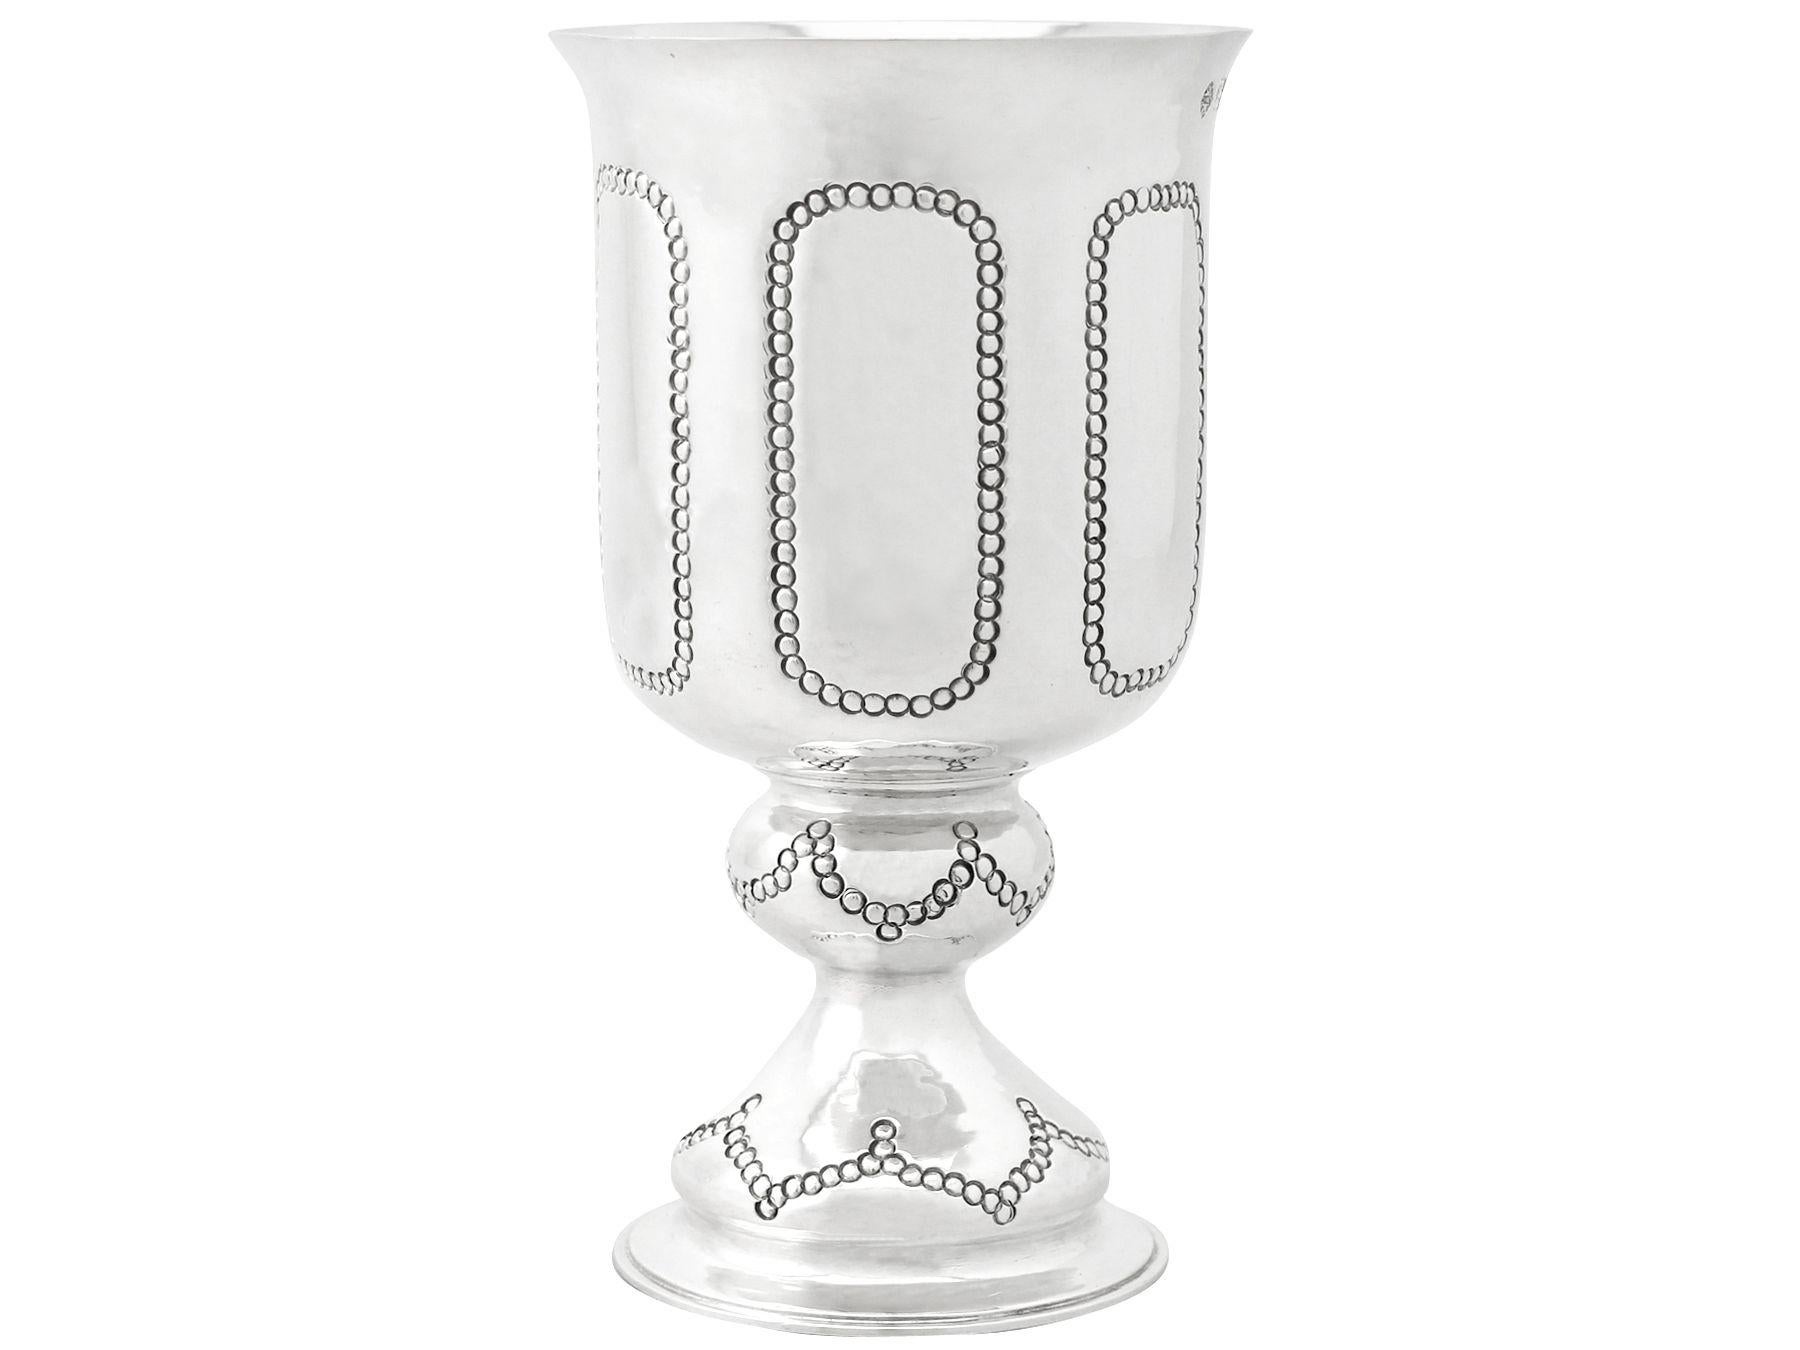 An exceptional, fine and impressive antique George V English sterling silver goblet made by C F Hancock & Co in the Arts & Crafts style; an addition to our wine and drinks related silverware collection.

This exceptional antique George V sterling